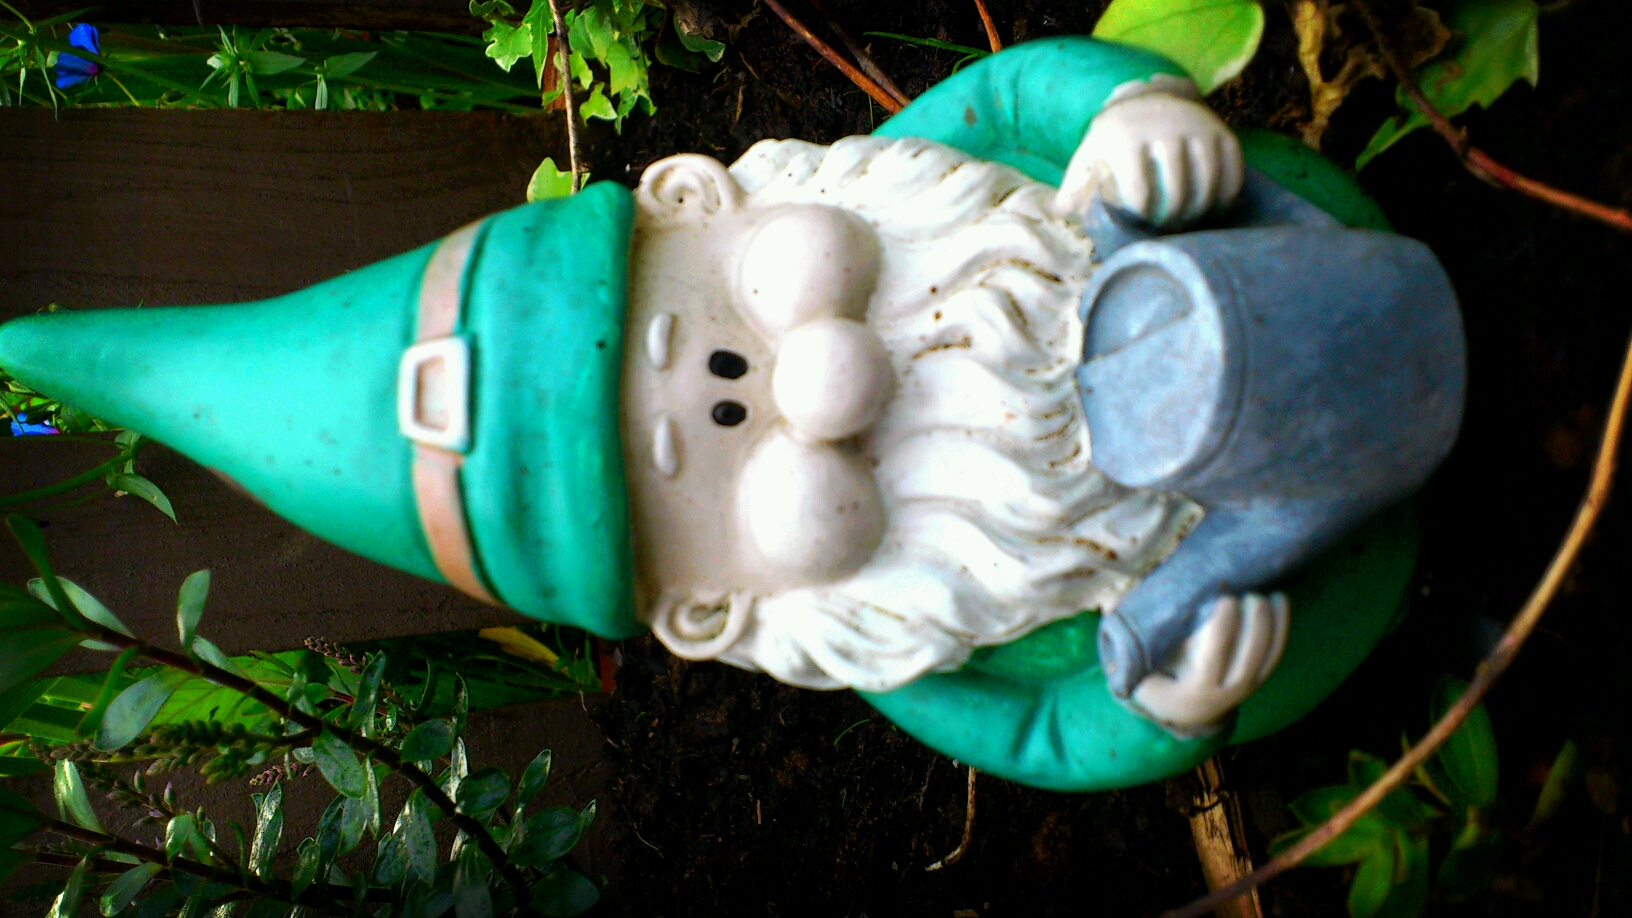 gnome statue sitting in bushes with an aqua water jug